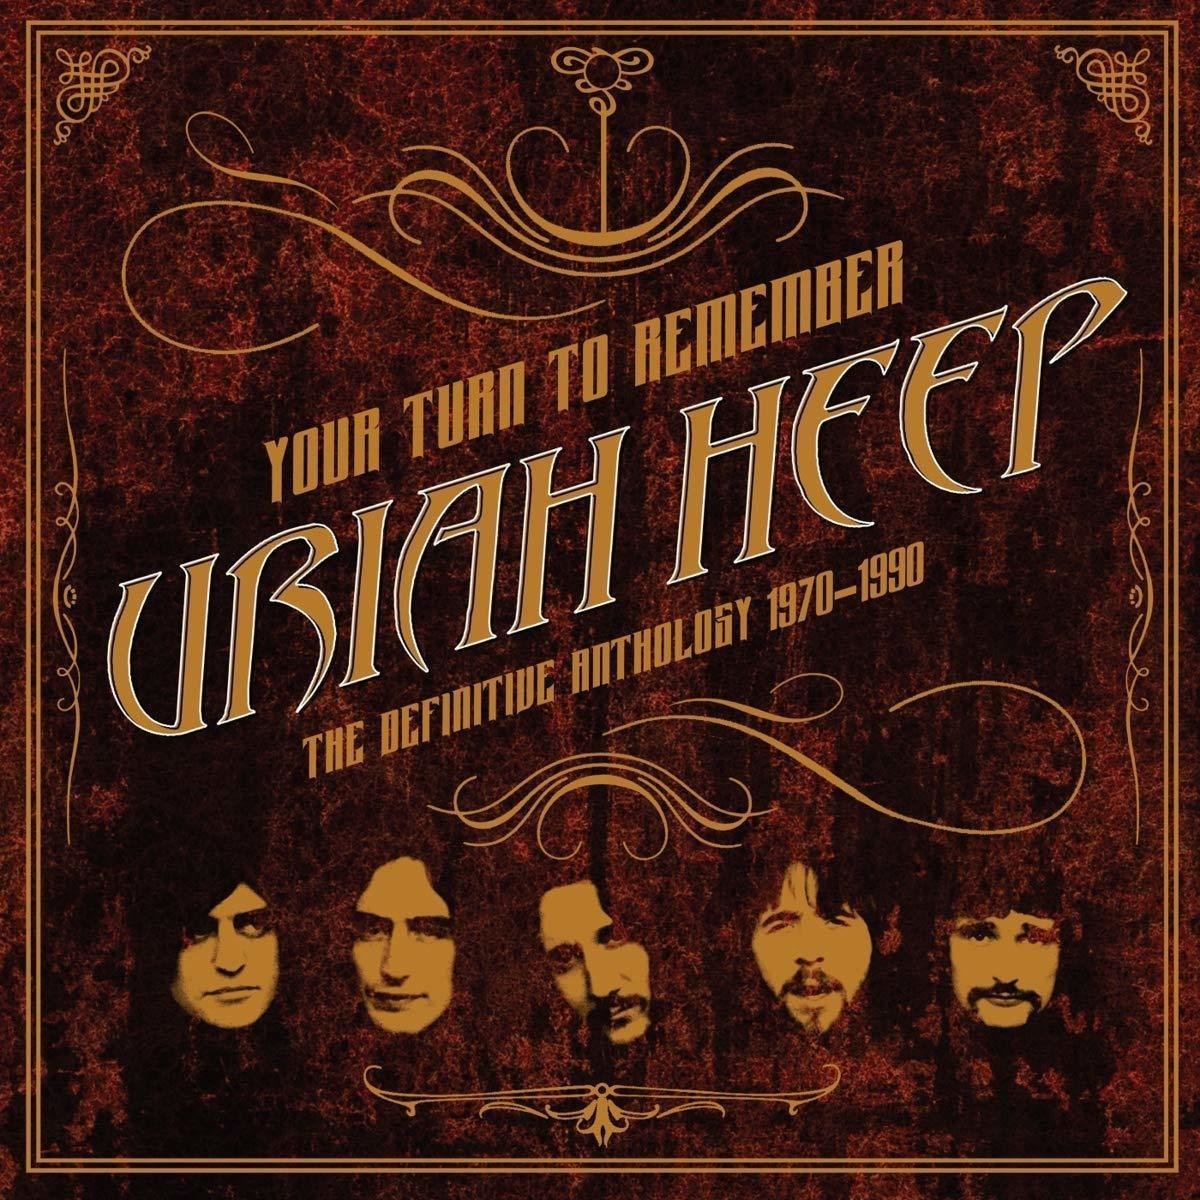 LP plošča Uriah Heep - Your Turn To Remember: The Definitive Anthology 1970-1990 (LP)